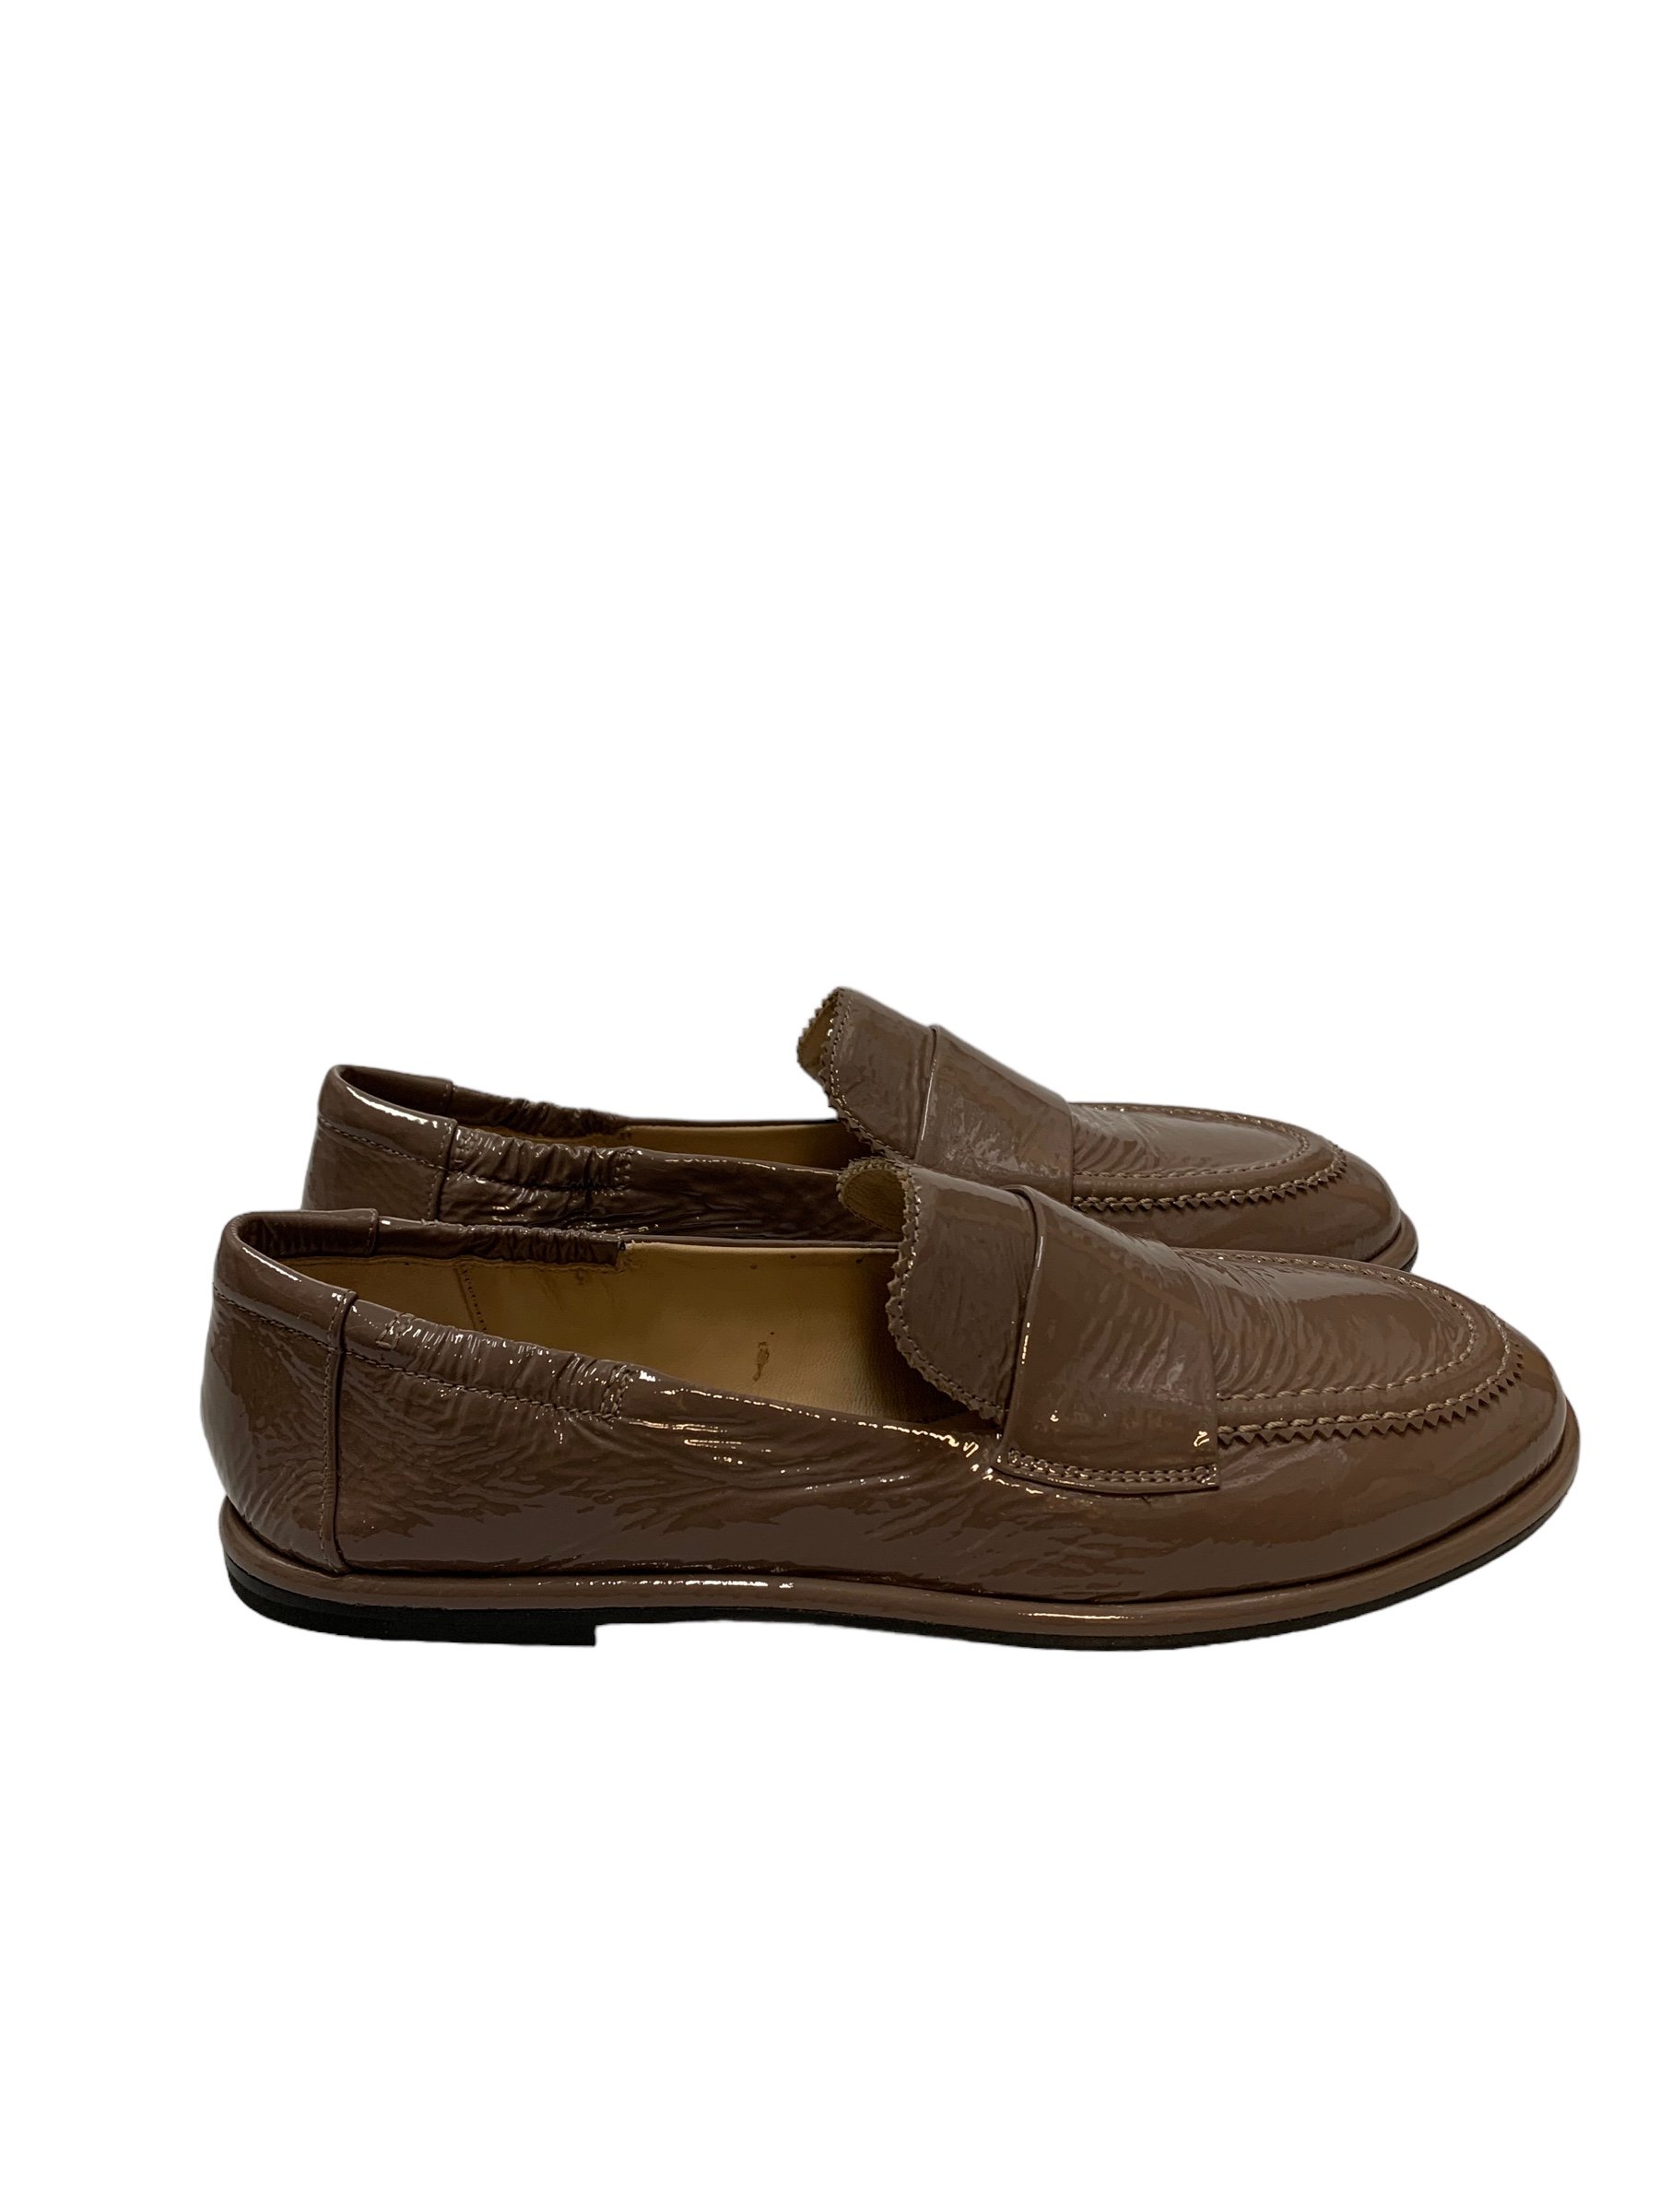 Pomme dor Loafers, lak taupe